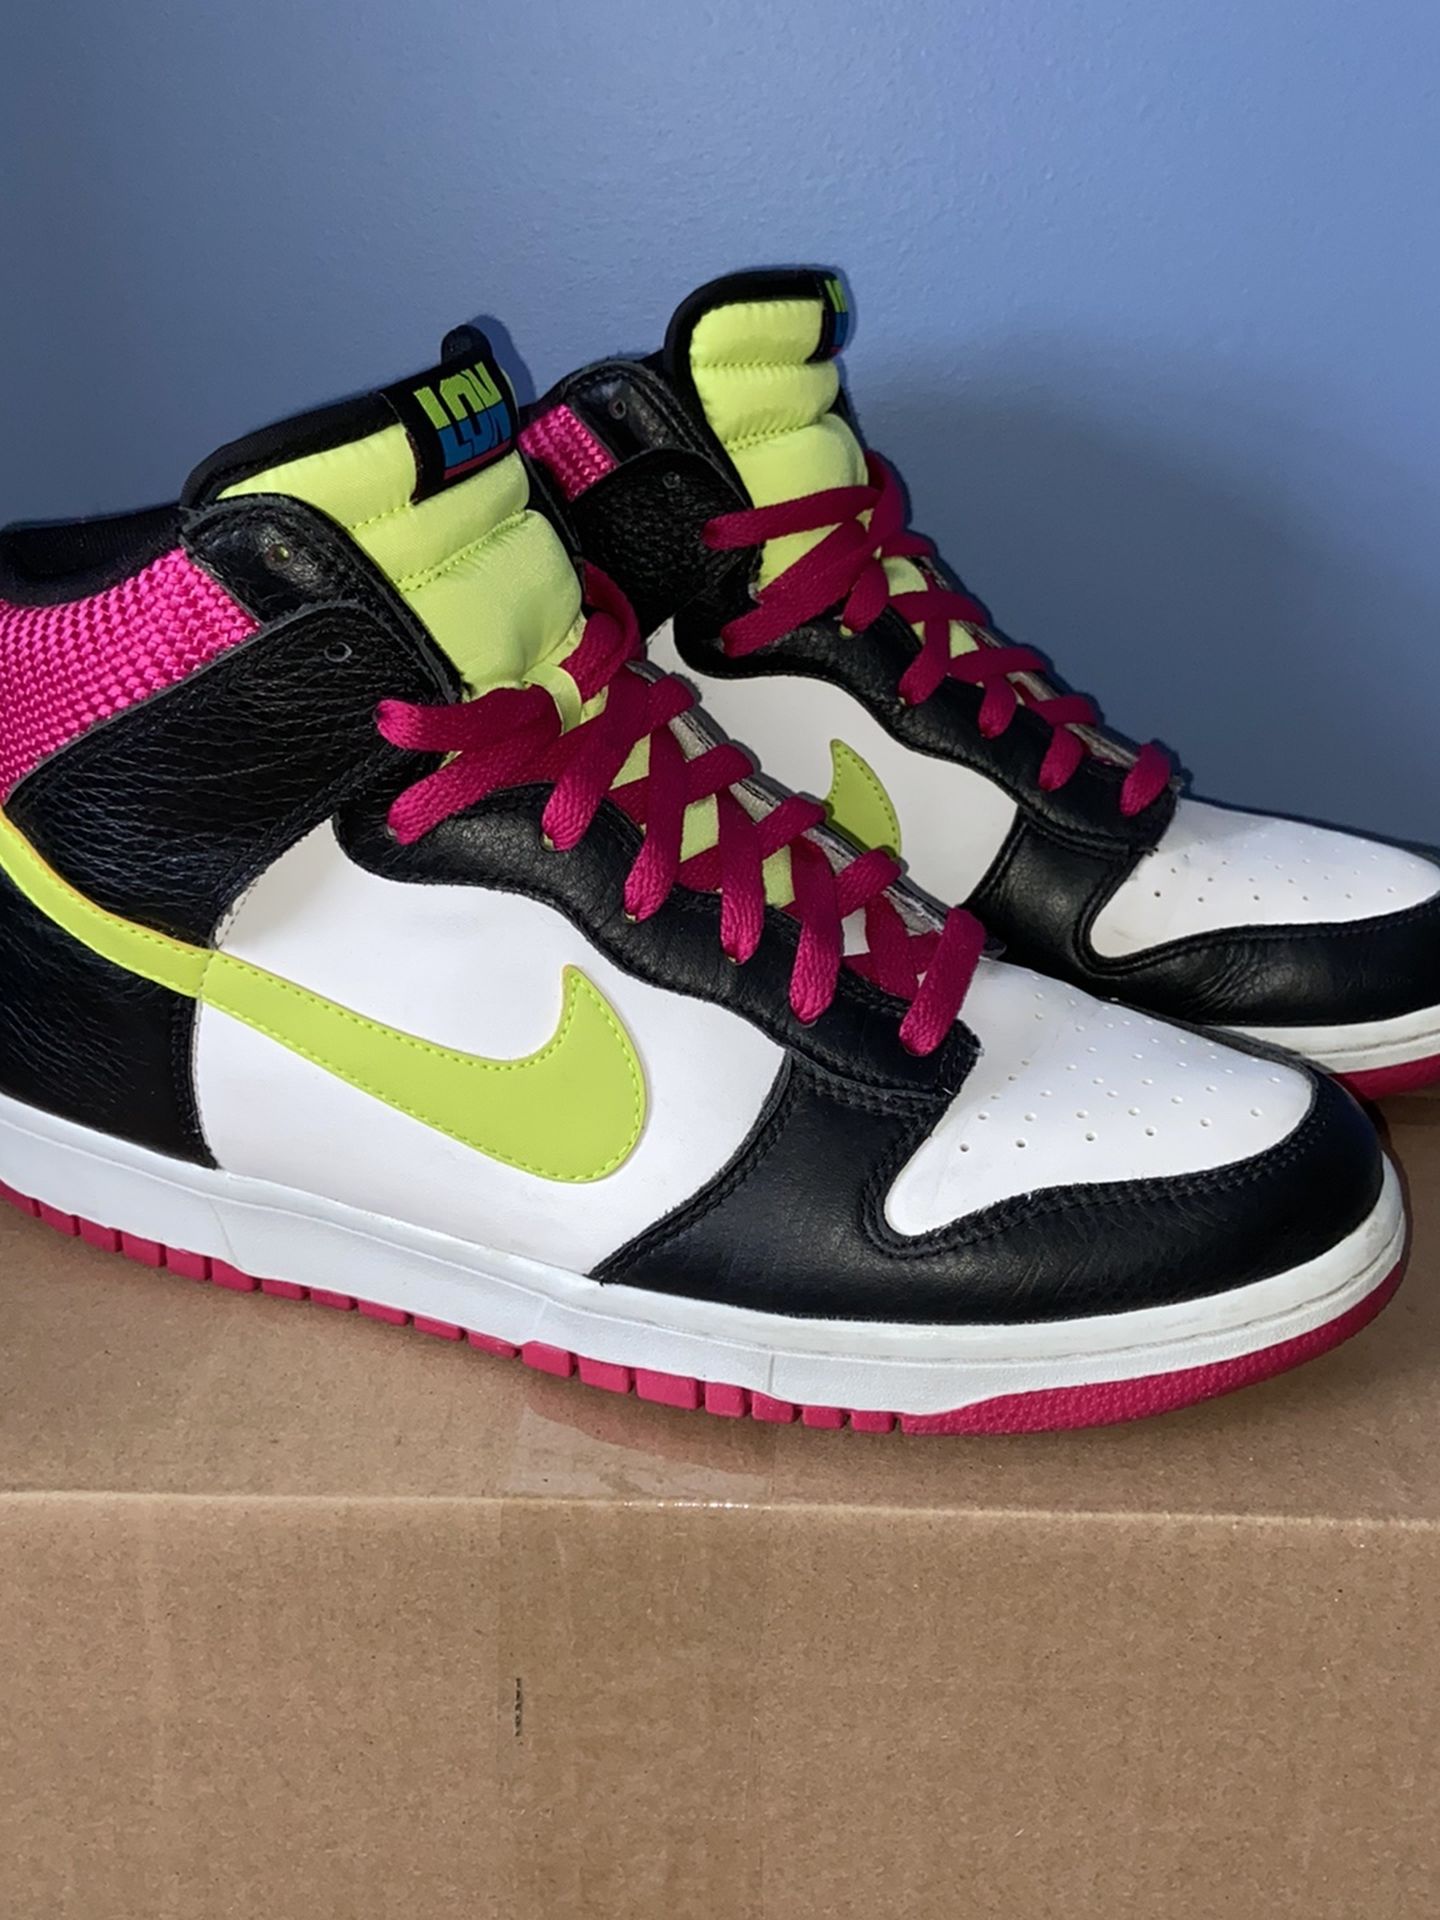 Nike Dunk High “London” Size 12 Fireberry/Volt Preowned